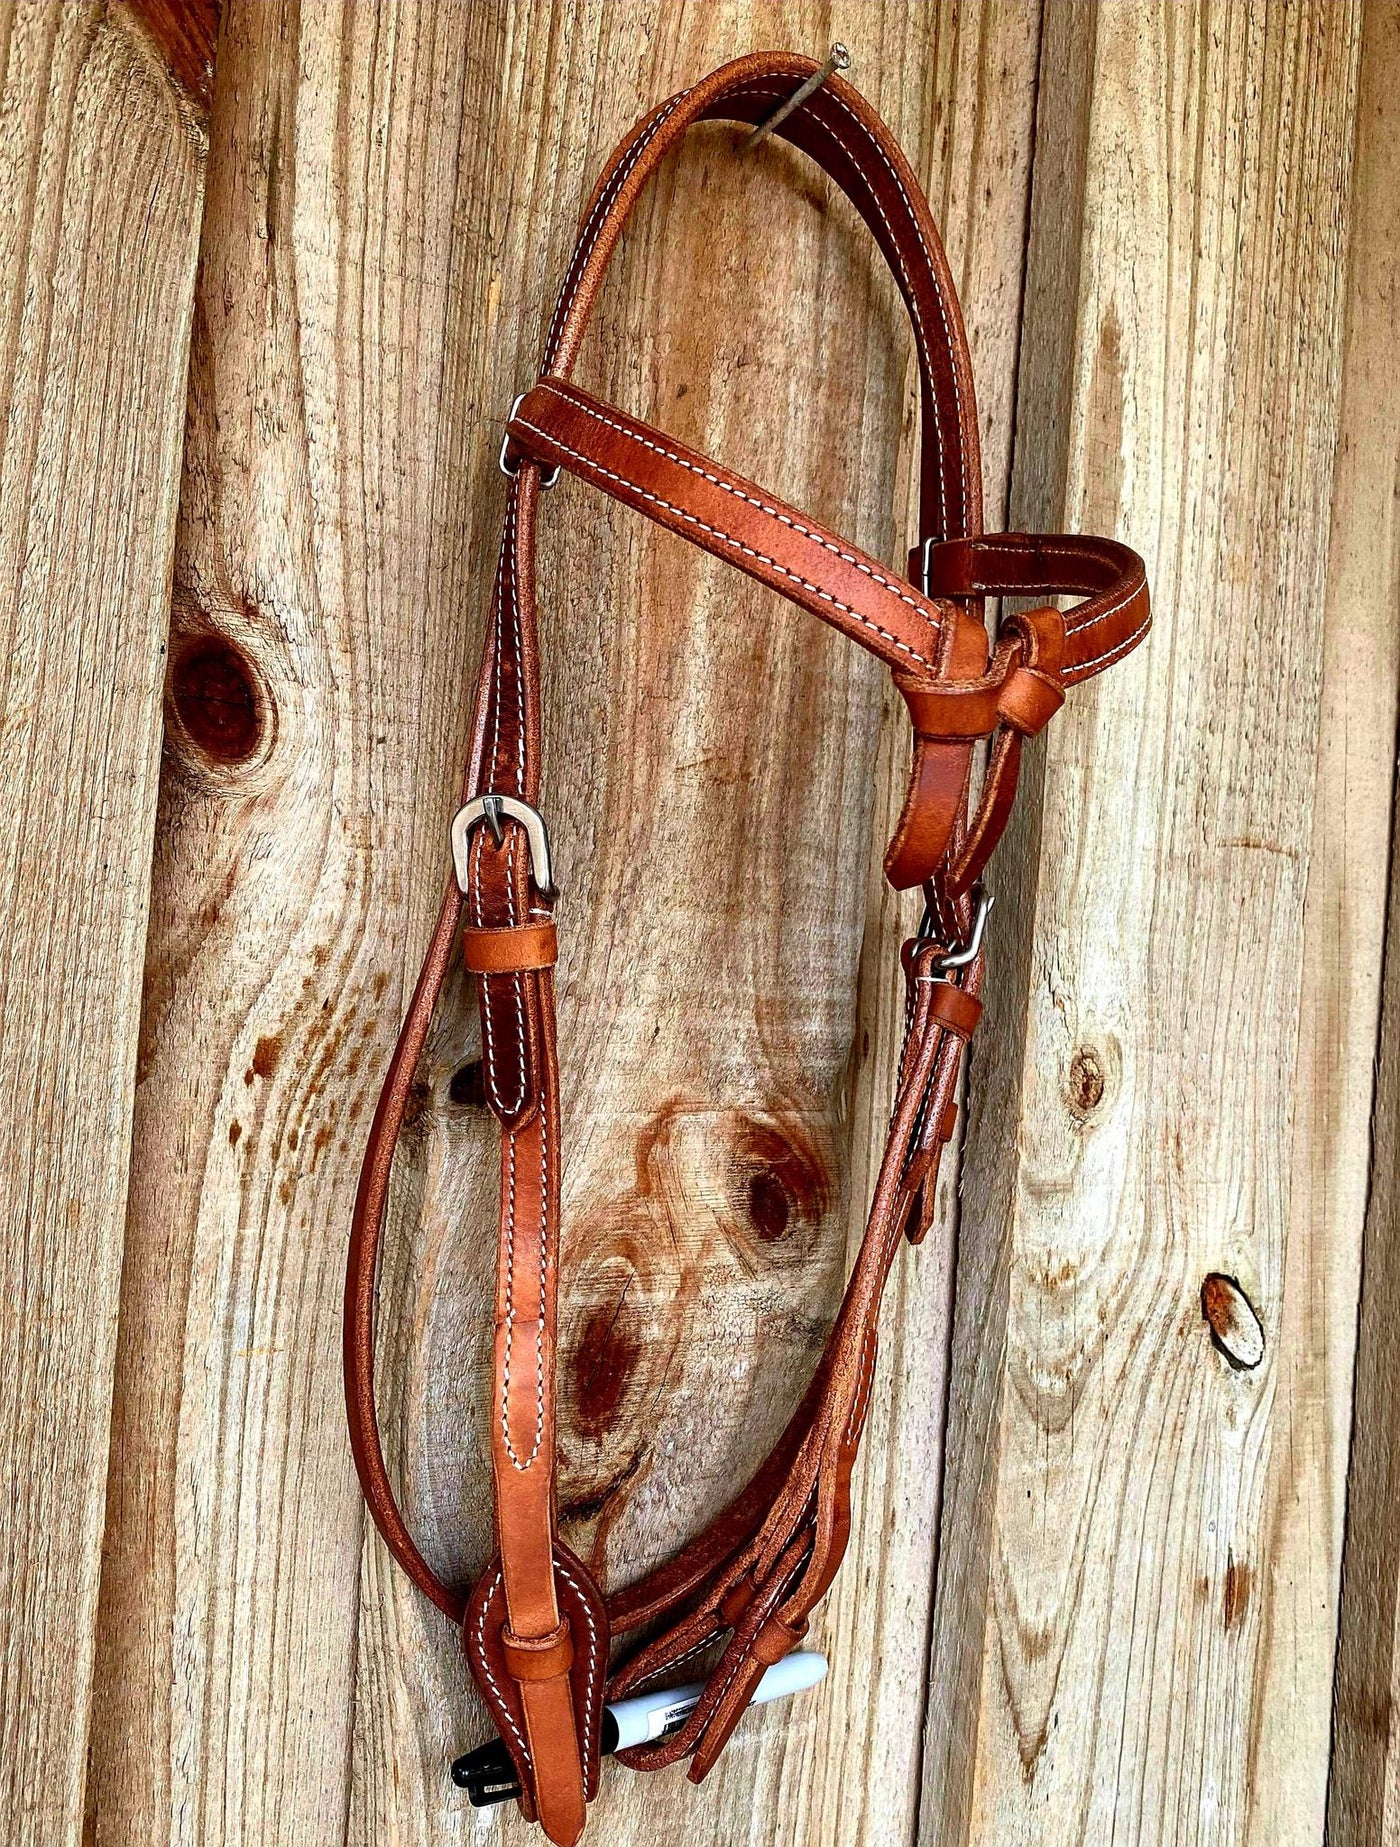 Western Bridle Browband Headstall Futurity Knot Harness Leather quick change